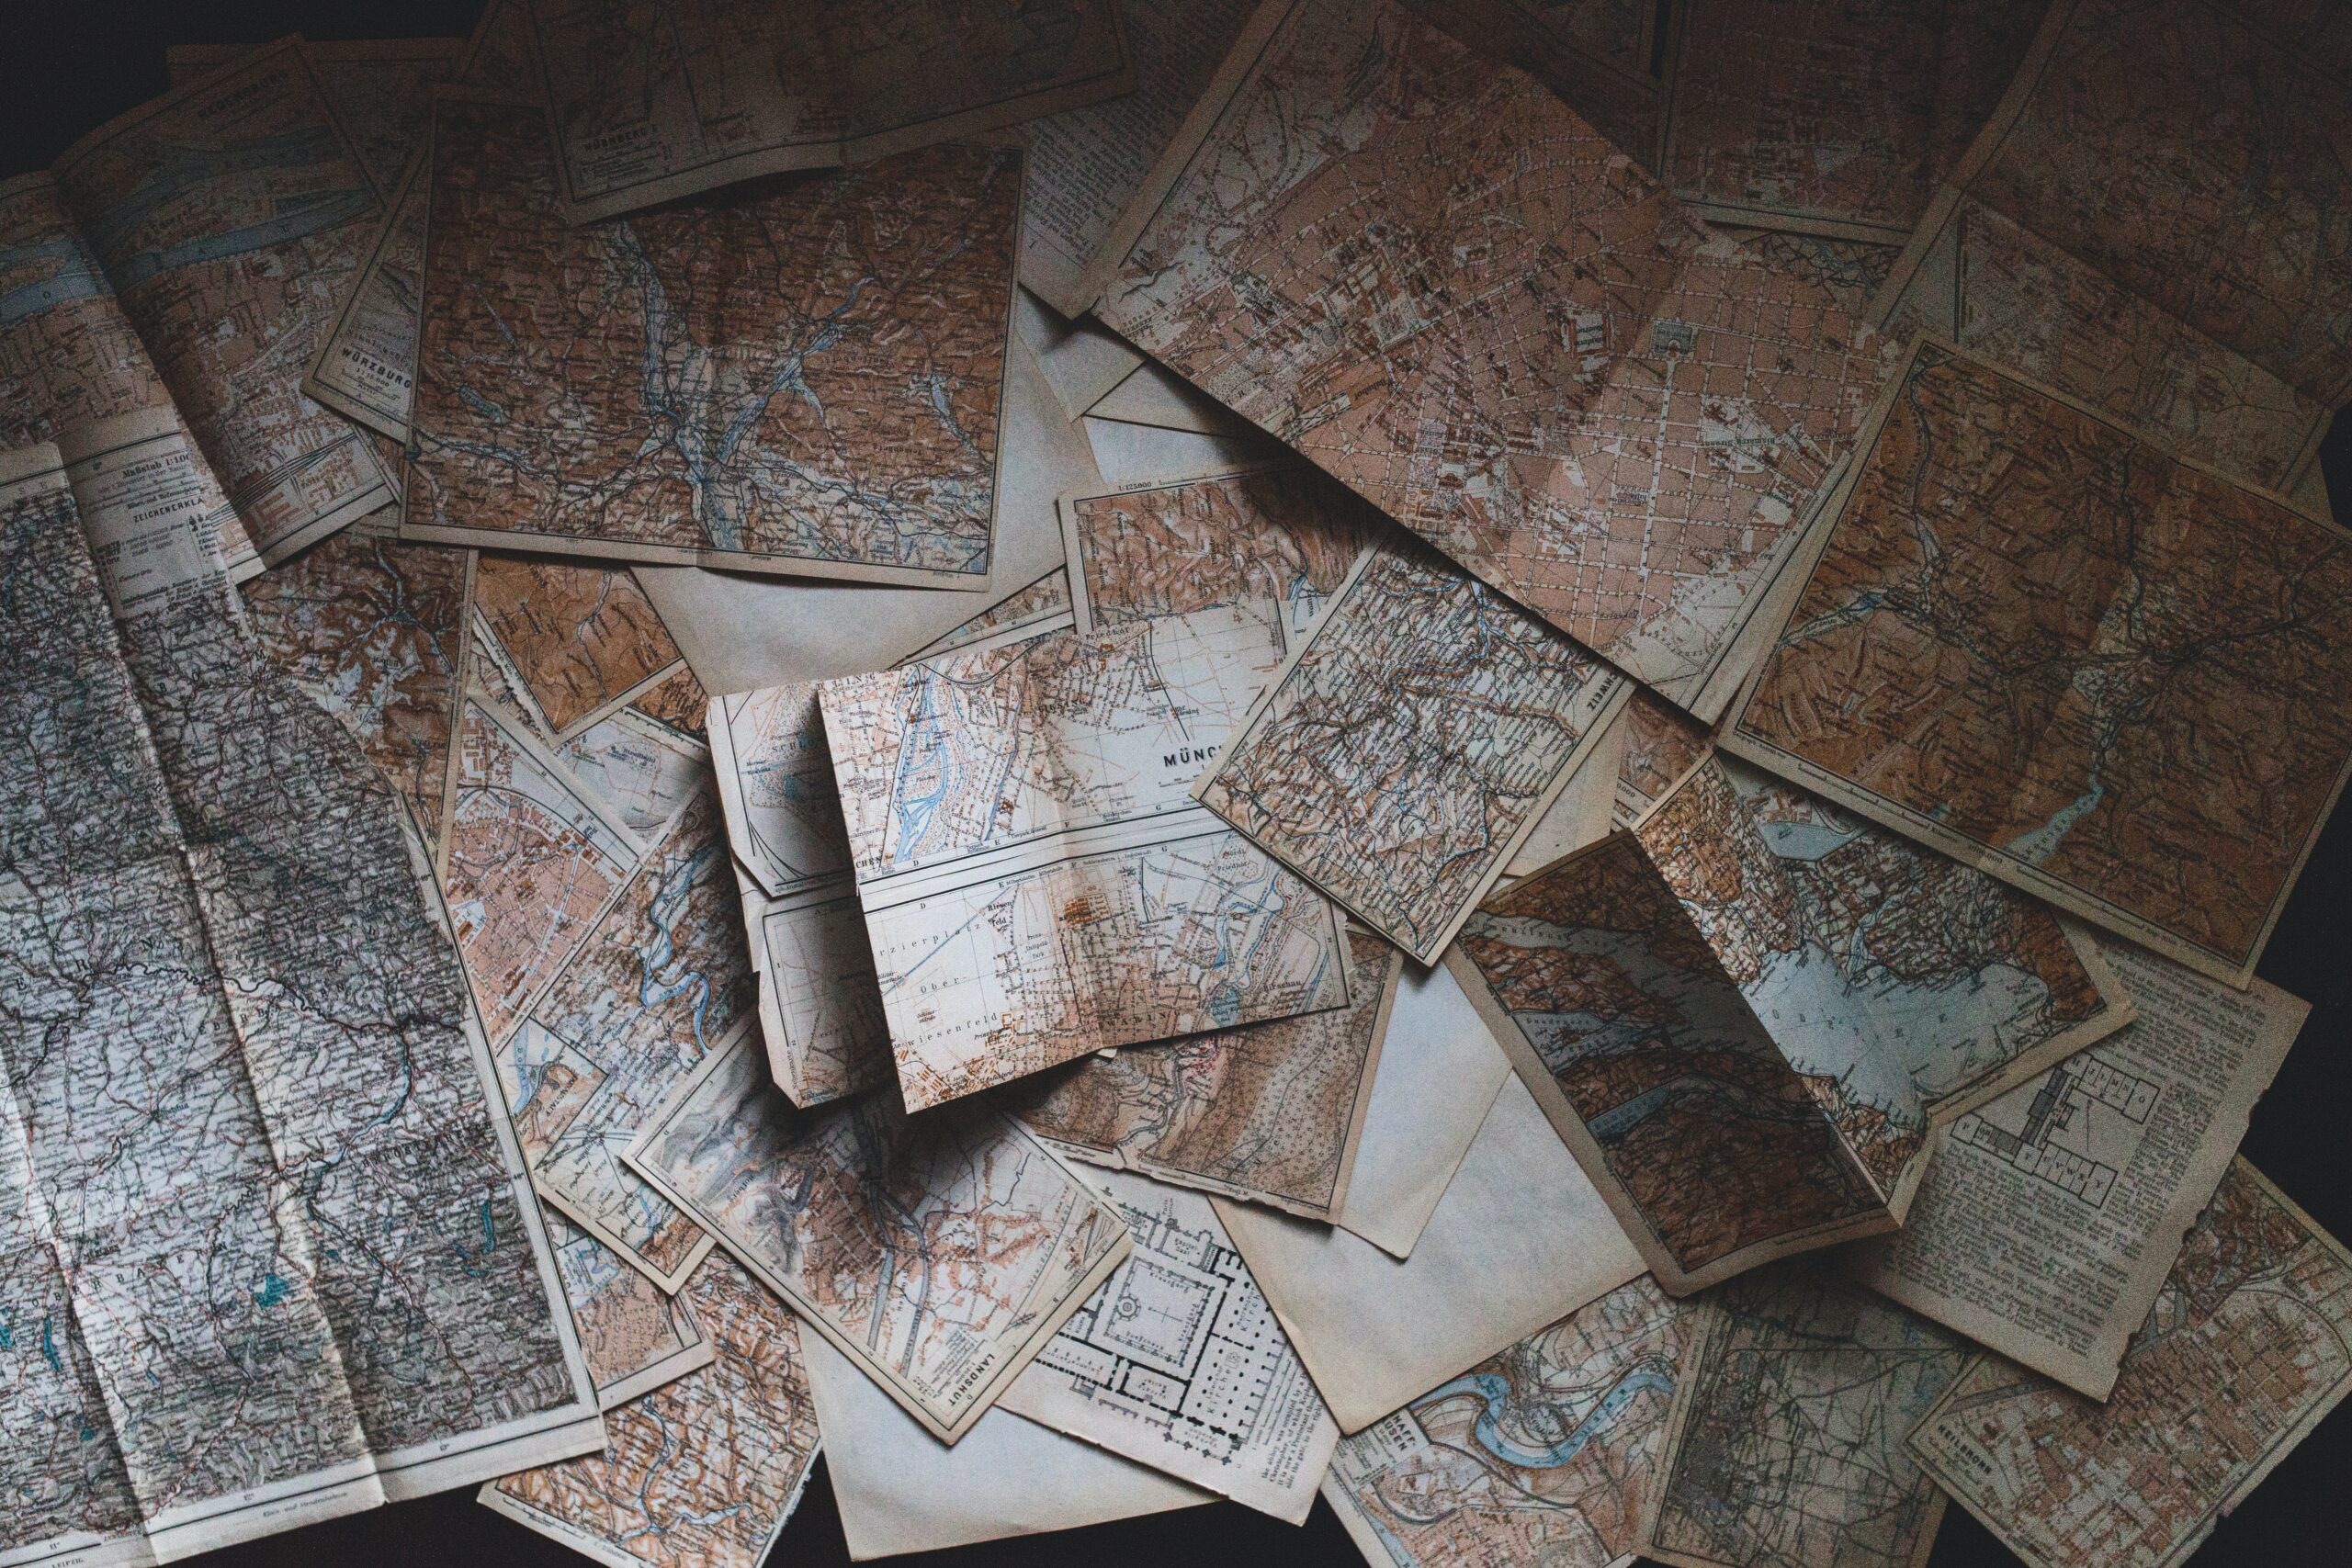 A road trip is a fun and affordable way to travel but can be boring. Learn about these classic and modern games that can help bring fun to the journey. 
pictured: detailed maps traditionally used to navigate road trips 